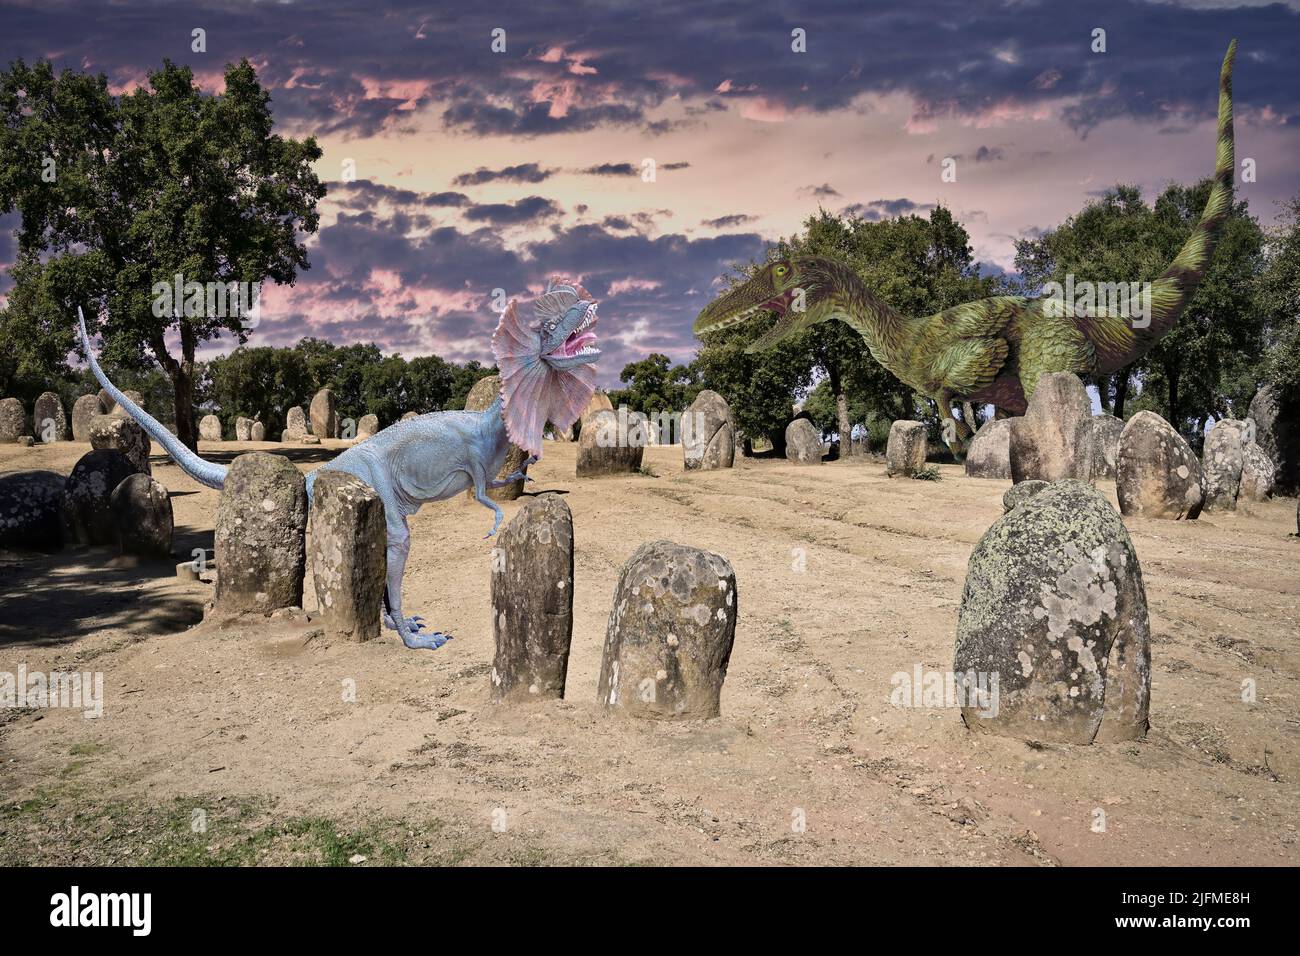 Fantasy image, Dinosaurs in cromlech Stock Photo